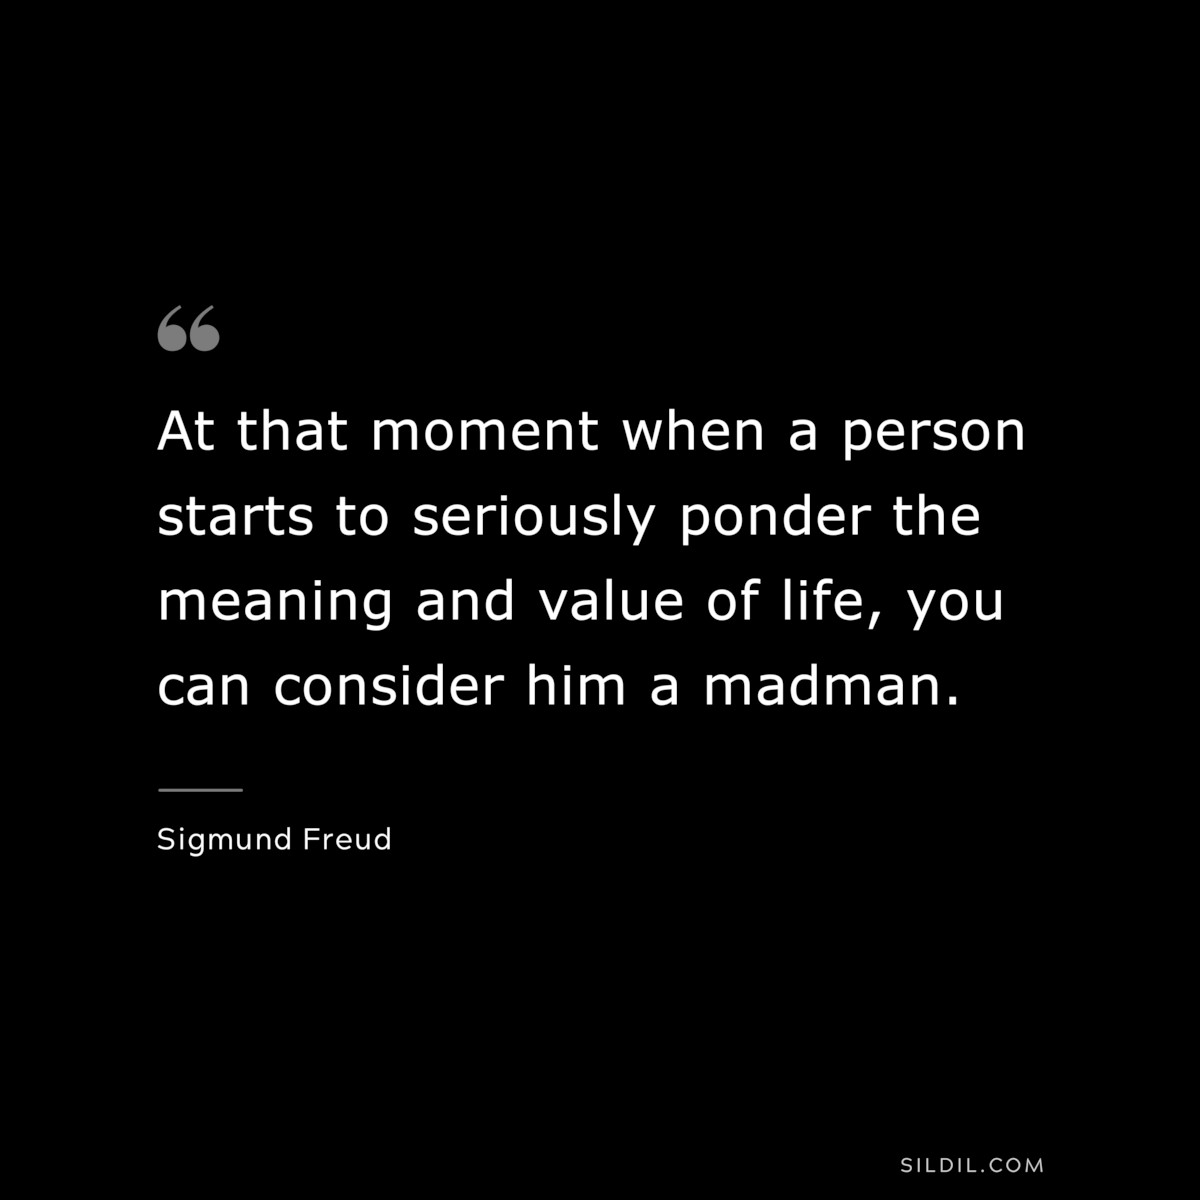 At that moment when a person starts to seriously ponder the meaning and value of life, you can consider him a madman. ― Sigmund Frued